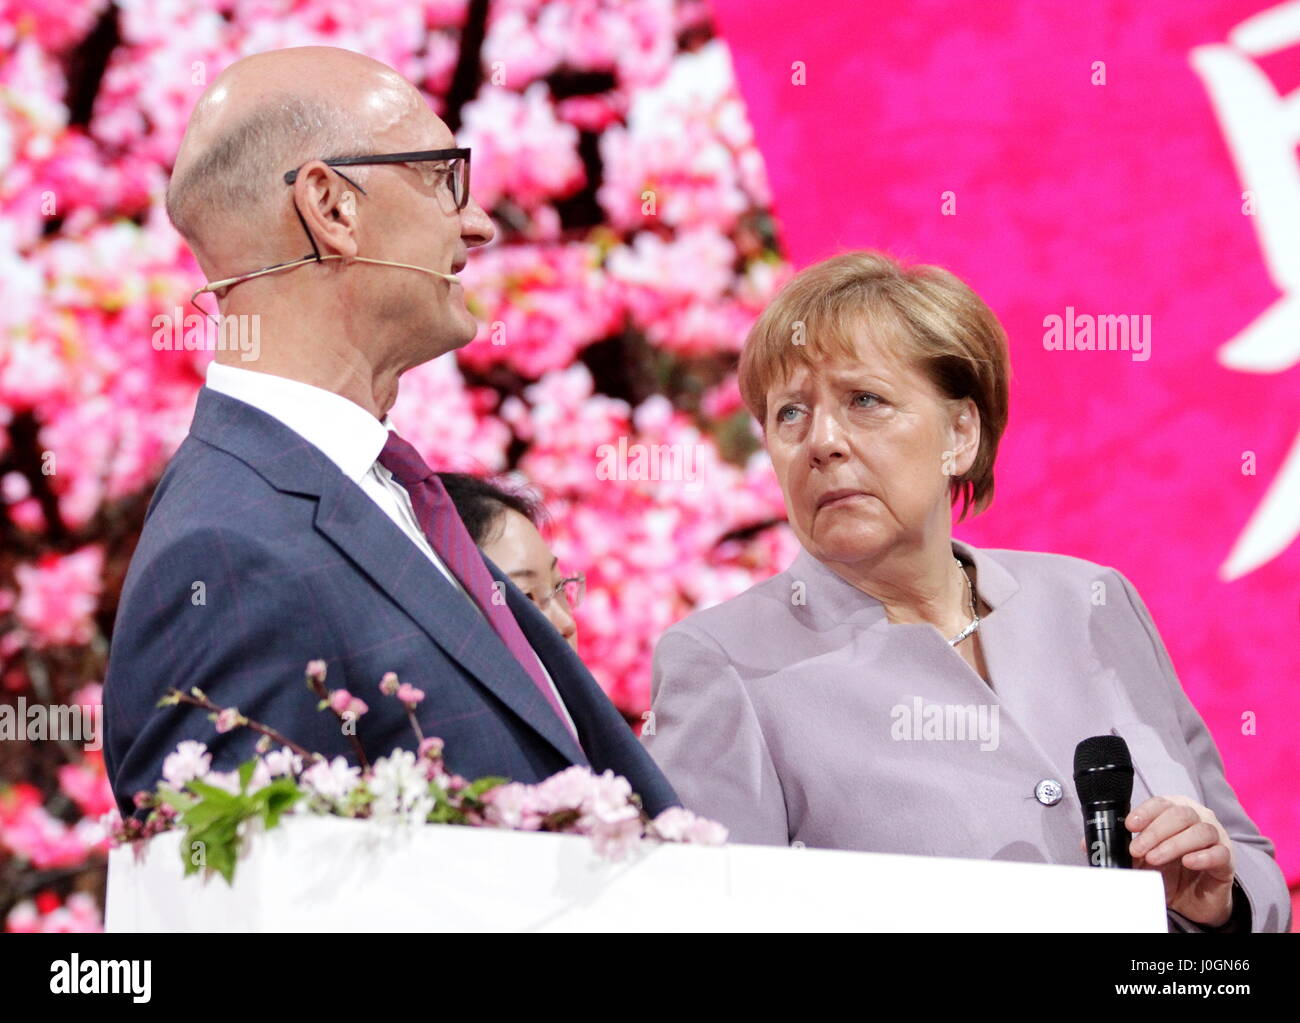 Hanover, Germany. 20th March, 2017. Timotheus Höttges (left), CEO Deutsche Telekom AG, meets Angela Merkel, Federal Cancellor of Germany, at Telekom's exhibition stand, CeBIT-opening walk, CeBIT 2017, ICT trade fair, lead theme 'd!conomy - no limits'. Photocredit: Christian Lademann Stock Photo